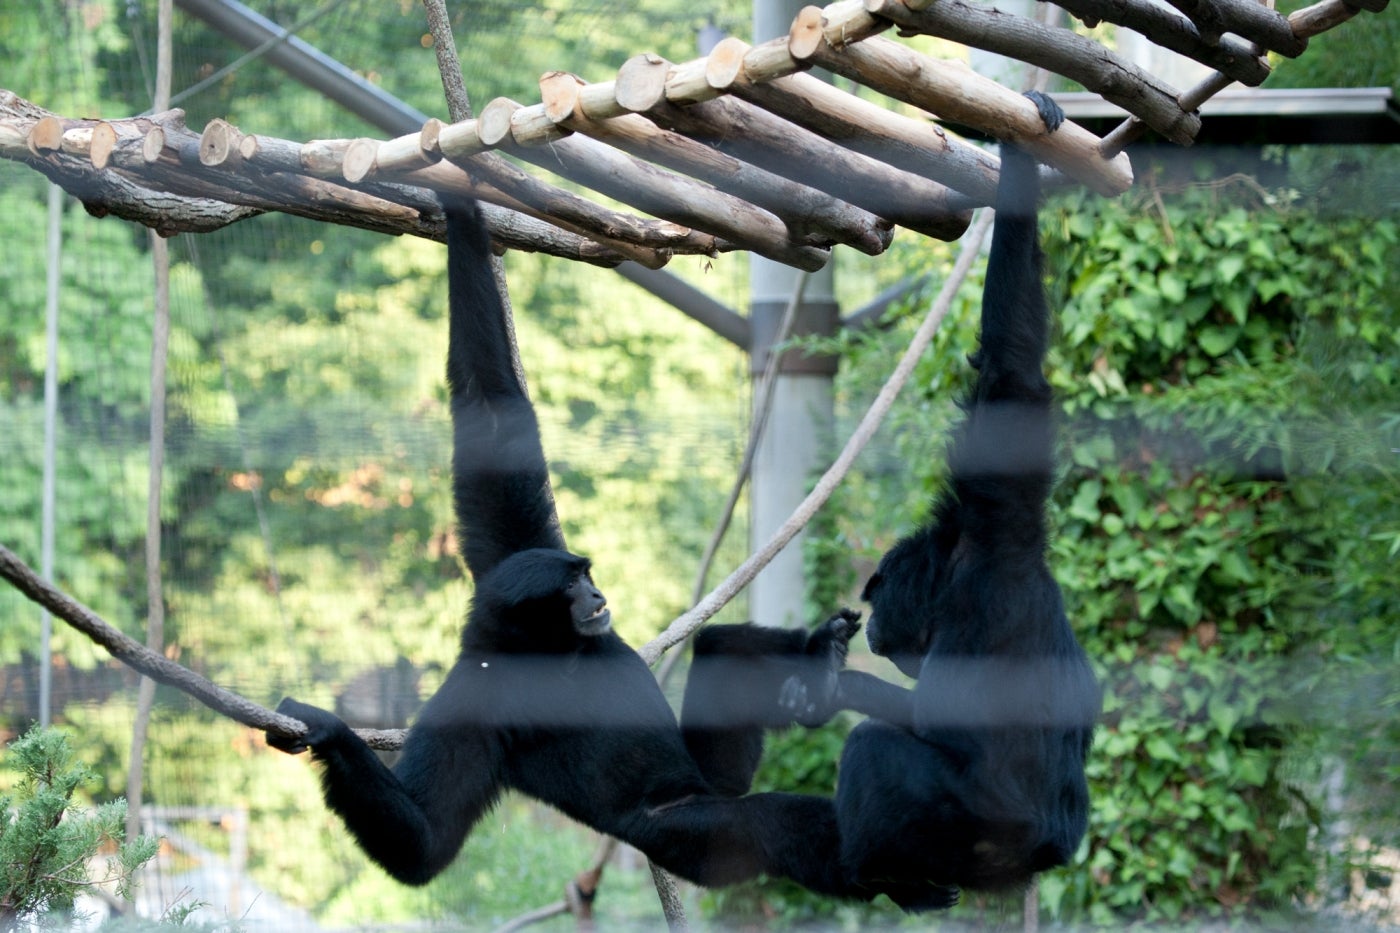 Siamangs (gibbons) Bradley and Ronnie hang onto a bridge made of tree branches. They have black fur and long arms. One of the gibbons holds and examines the other's foot.